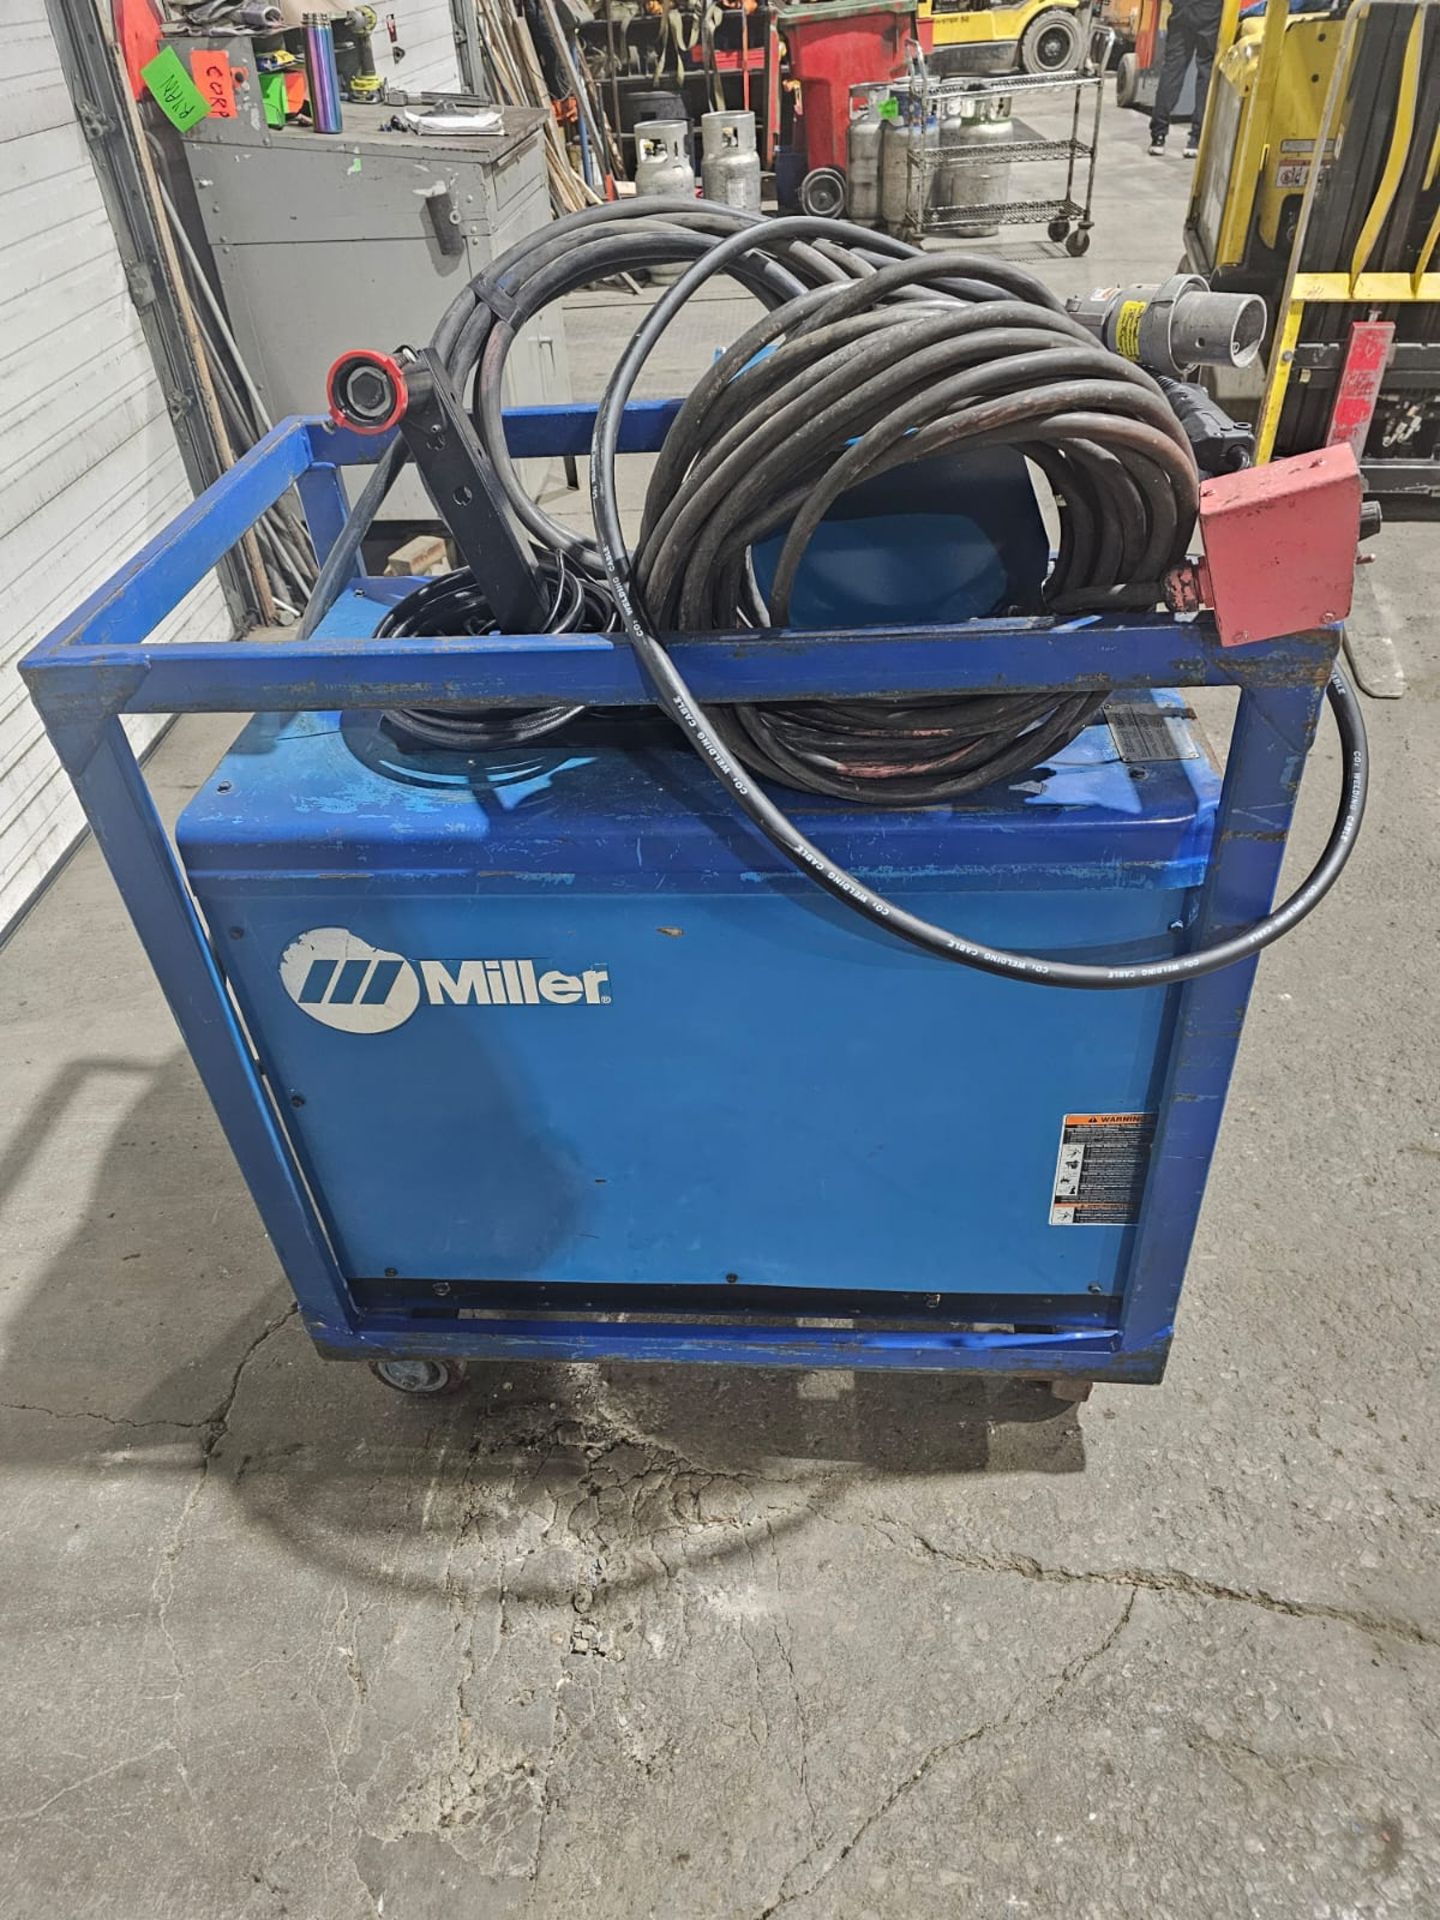 Miller Dimension 652 Mig Welder 650 Amp Mig Tig Stick Multi Process Power Source with 22A Wire - Image 4 of 8